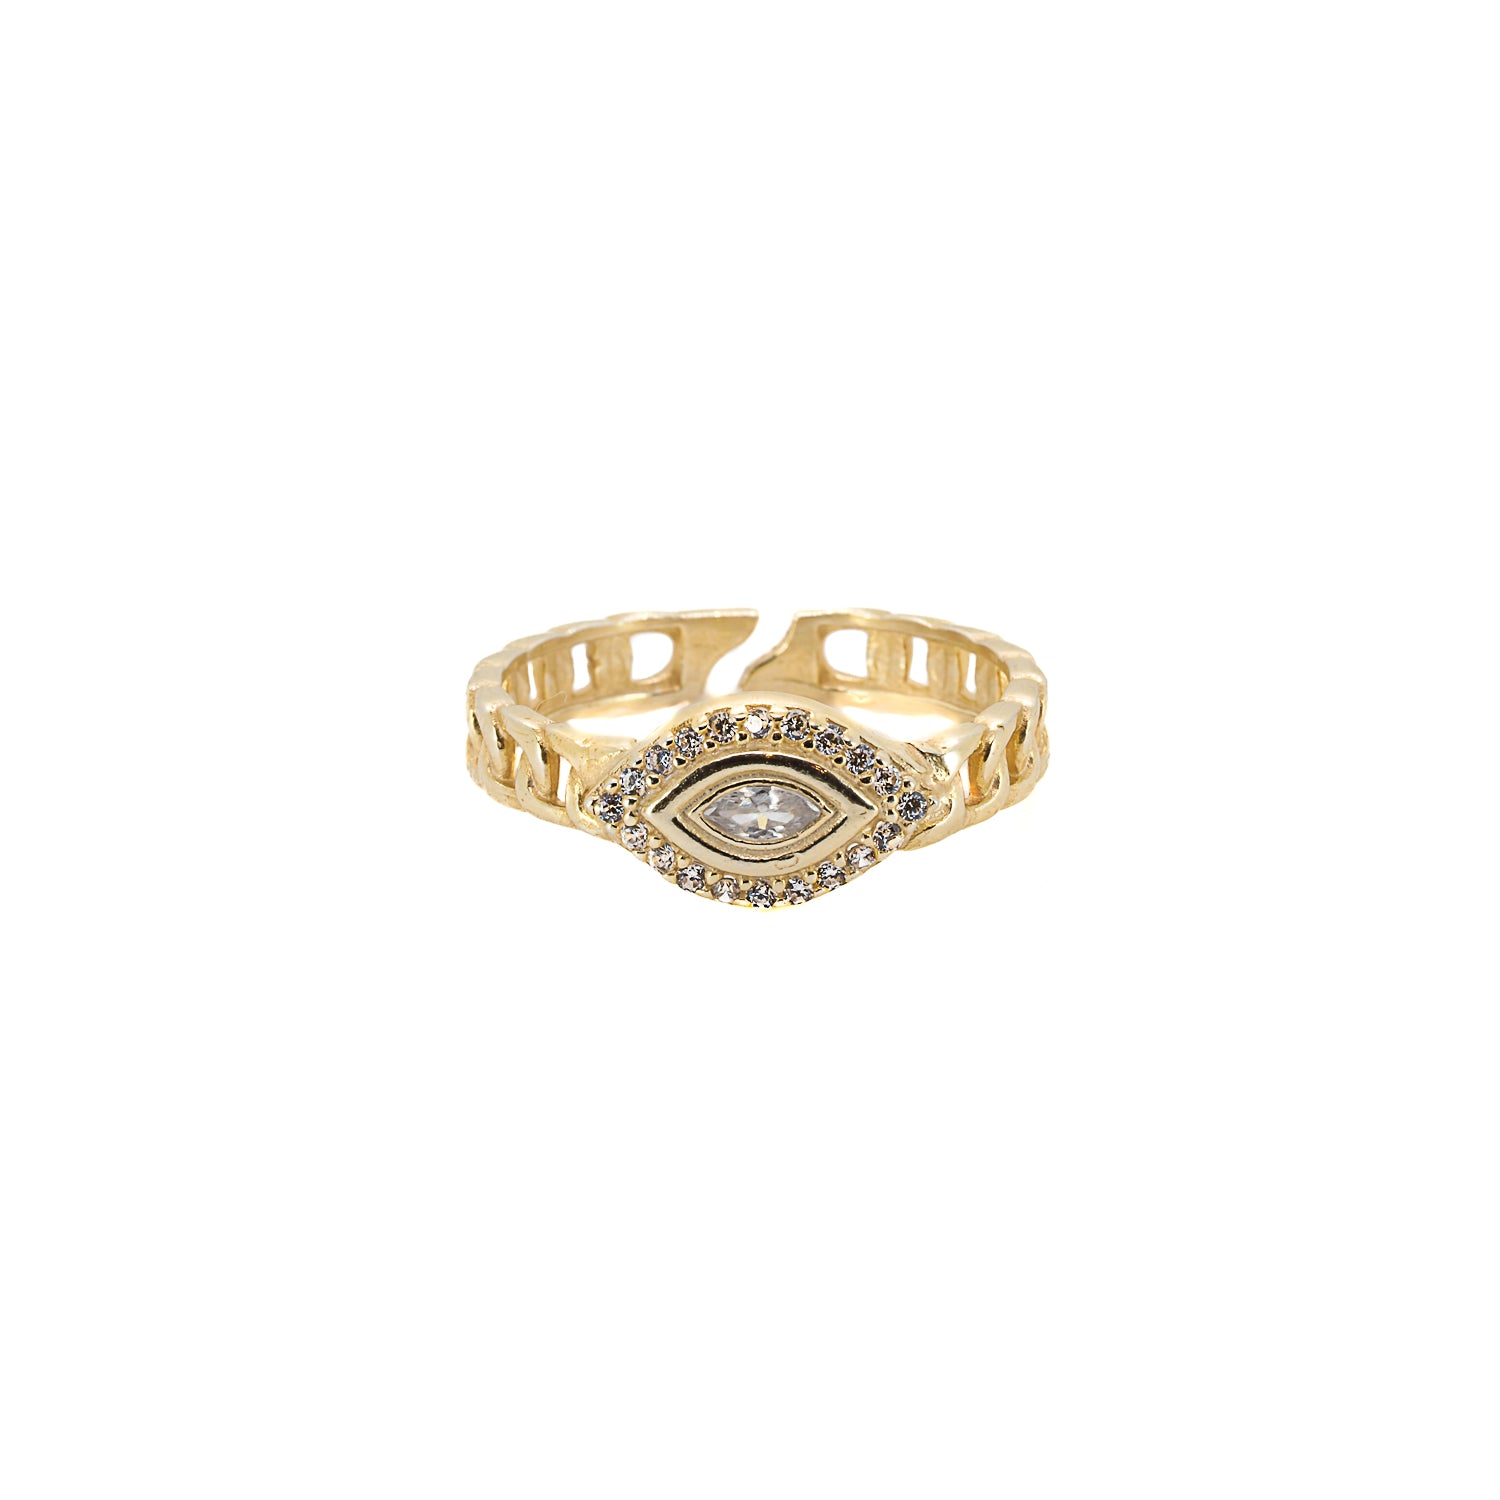 Evil Eye Symbol Ring - Luxurious Shine & Cultural Significance